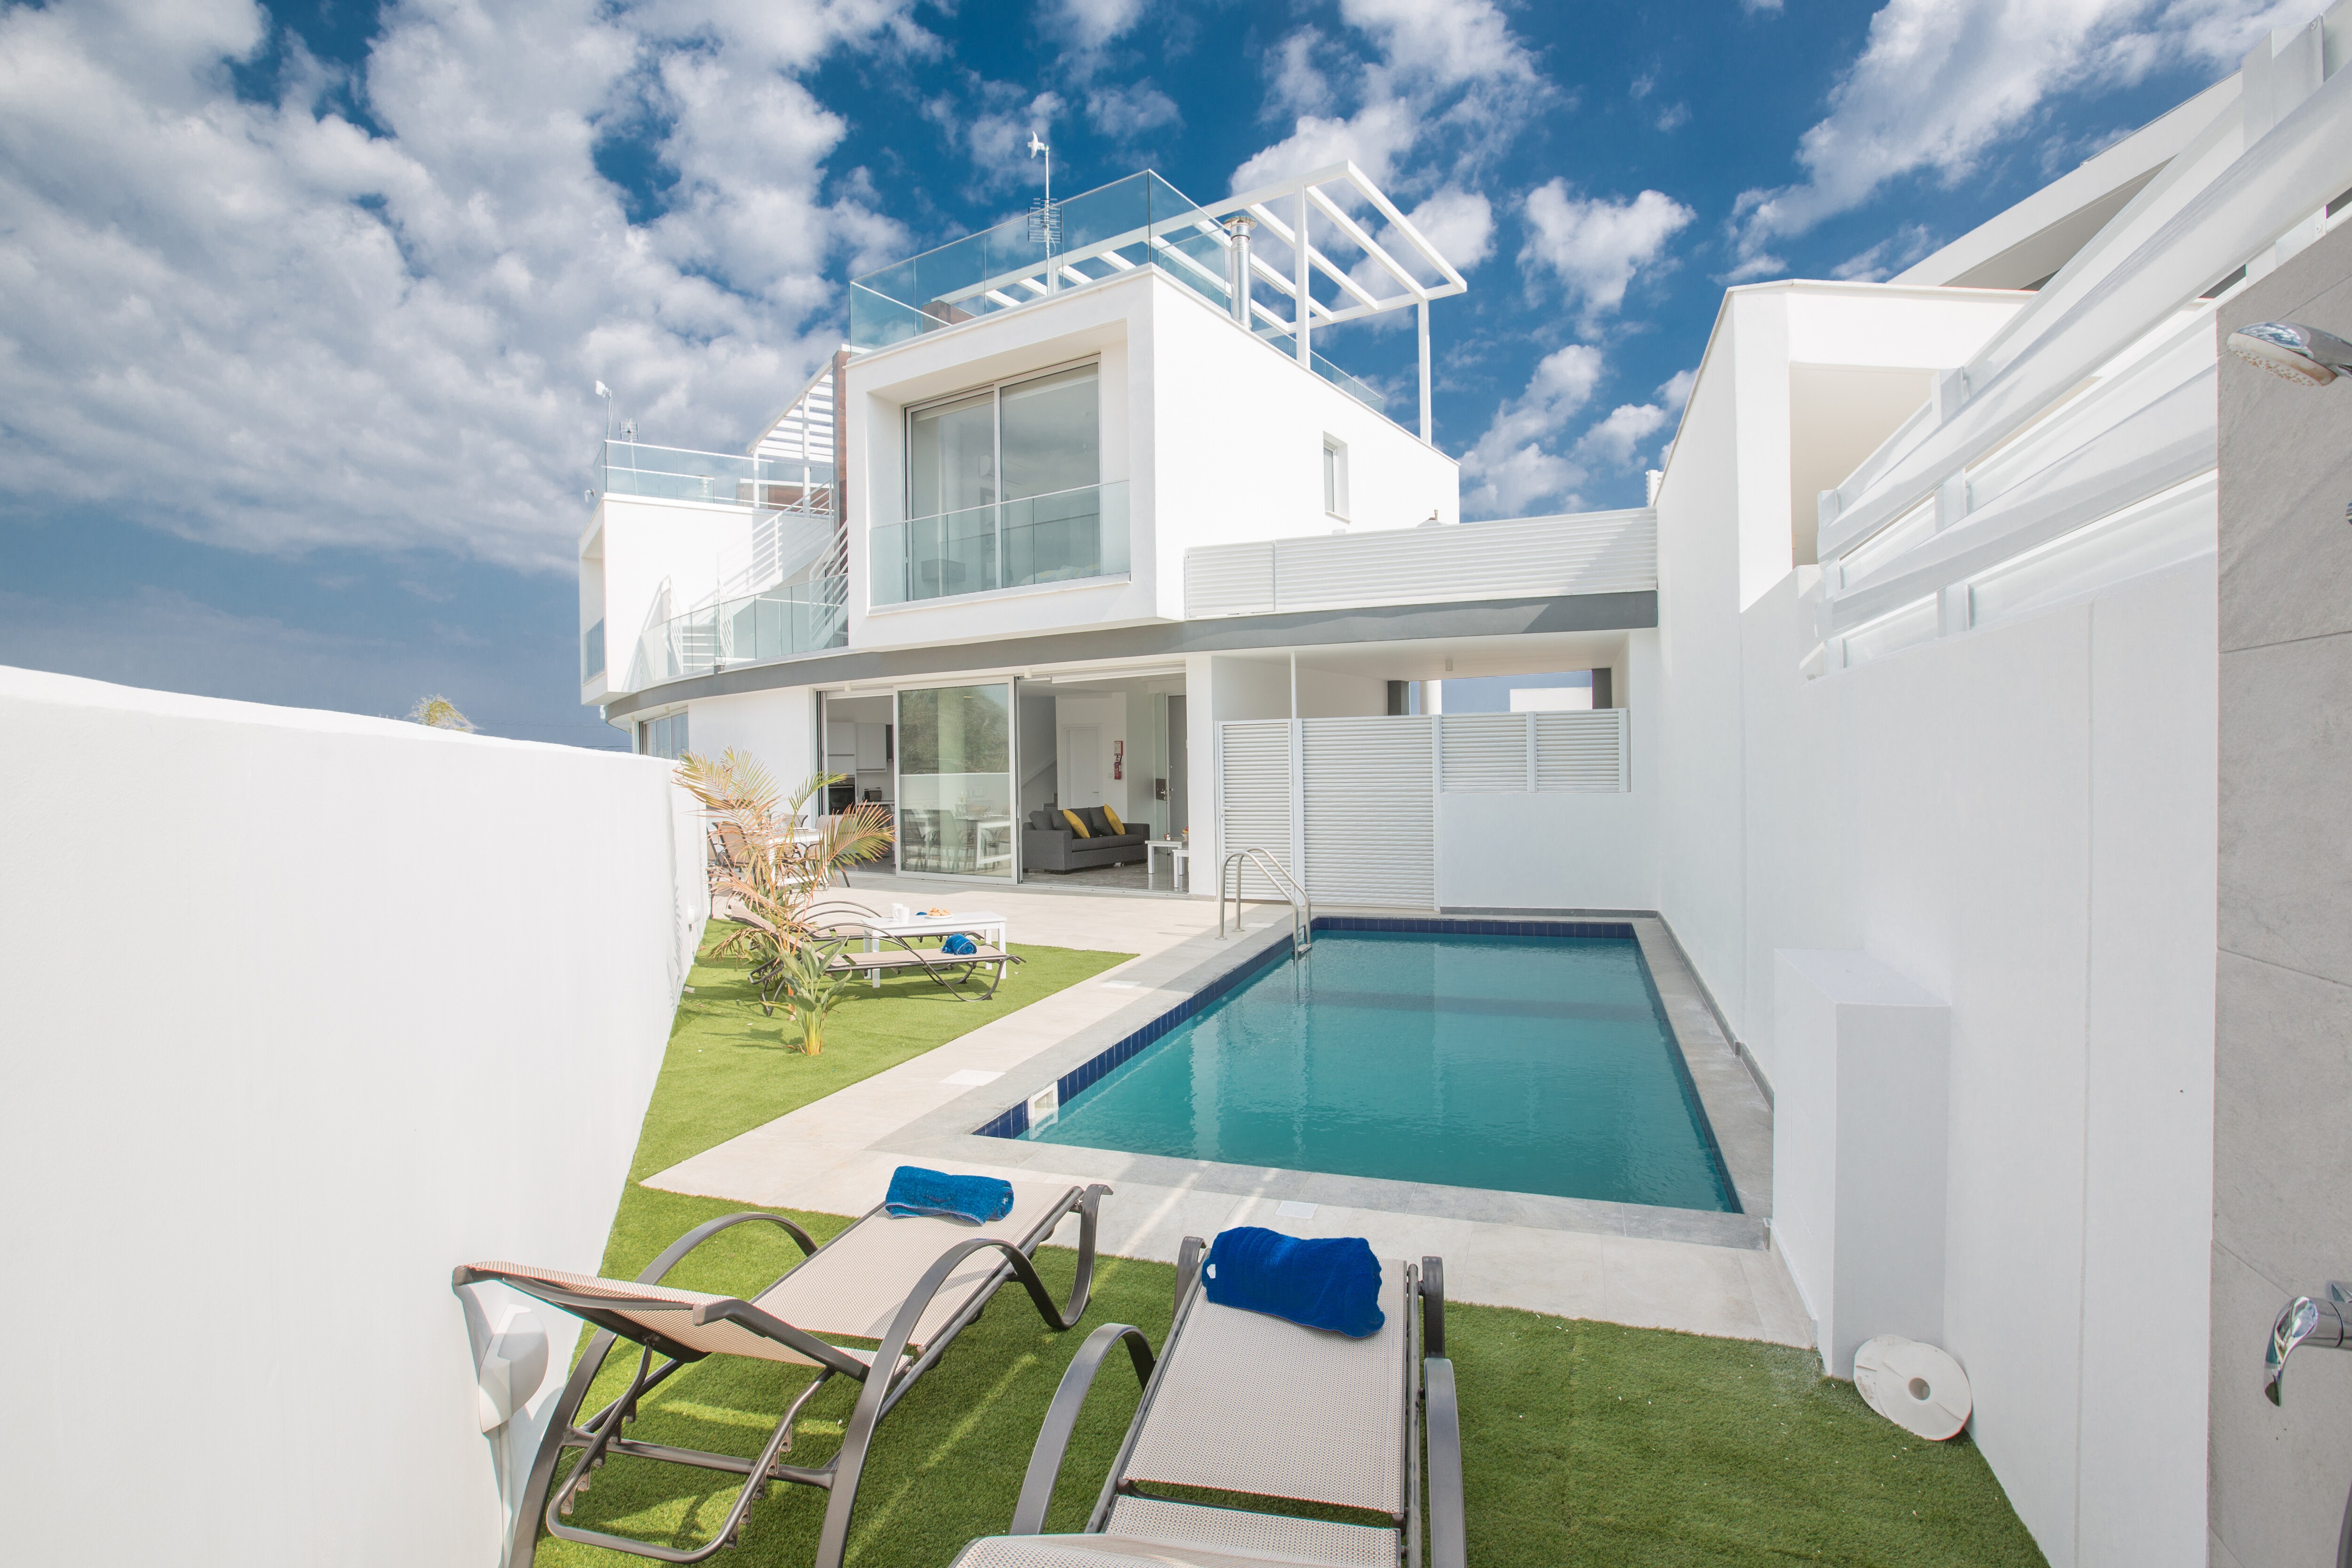 Property Image 1 - Villa Prol23, New and Modern 2bdr Protaras Villa with Pool, Close to the Beach